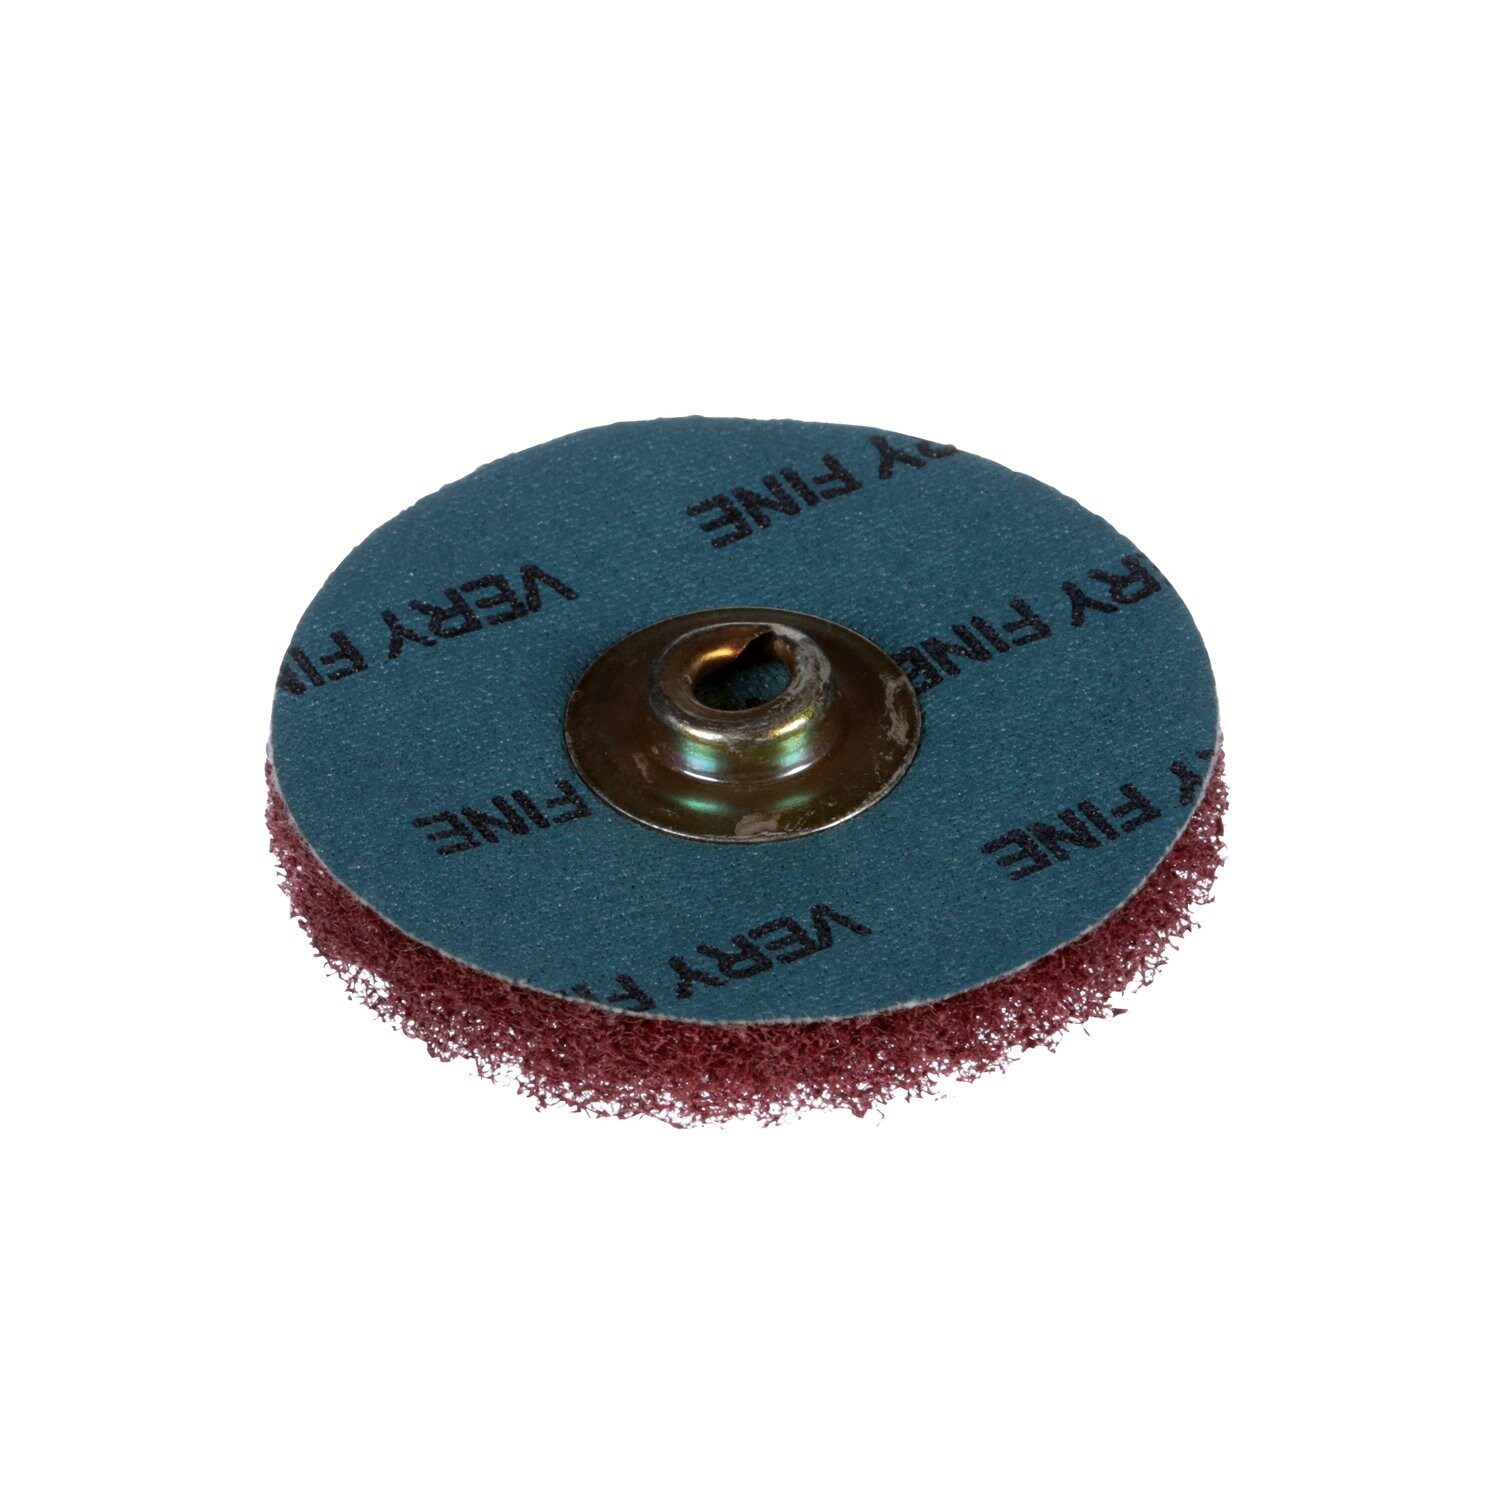 7010330622 - Standard Abrasives Quick Change Buff and Blend HS Disc, 840322, A/O
Very Fine, TSM, 2 in, 50/Carton, 500 ea/Case